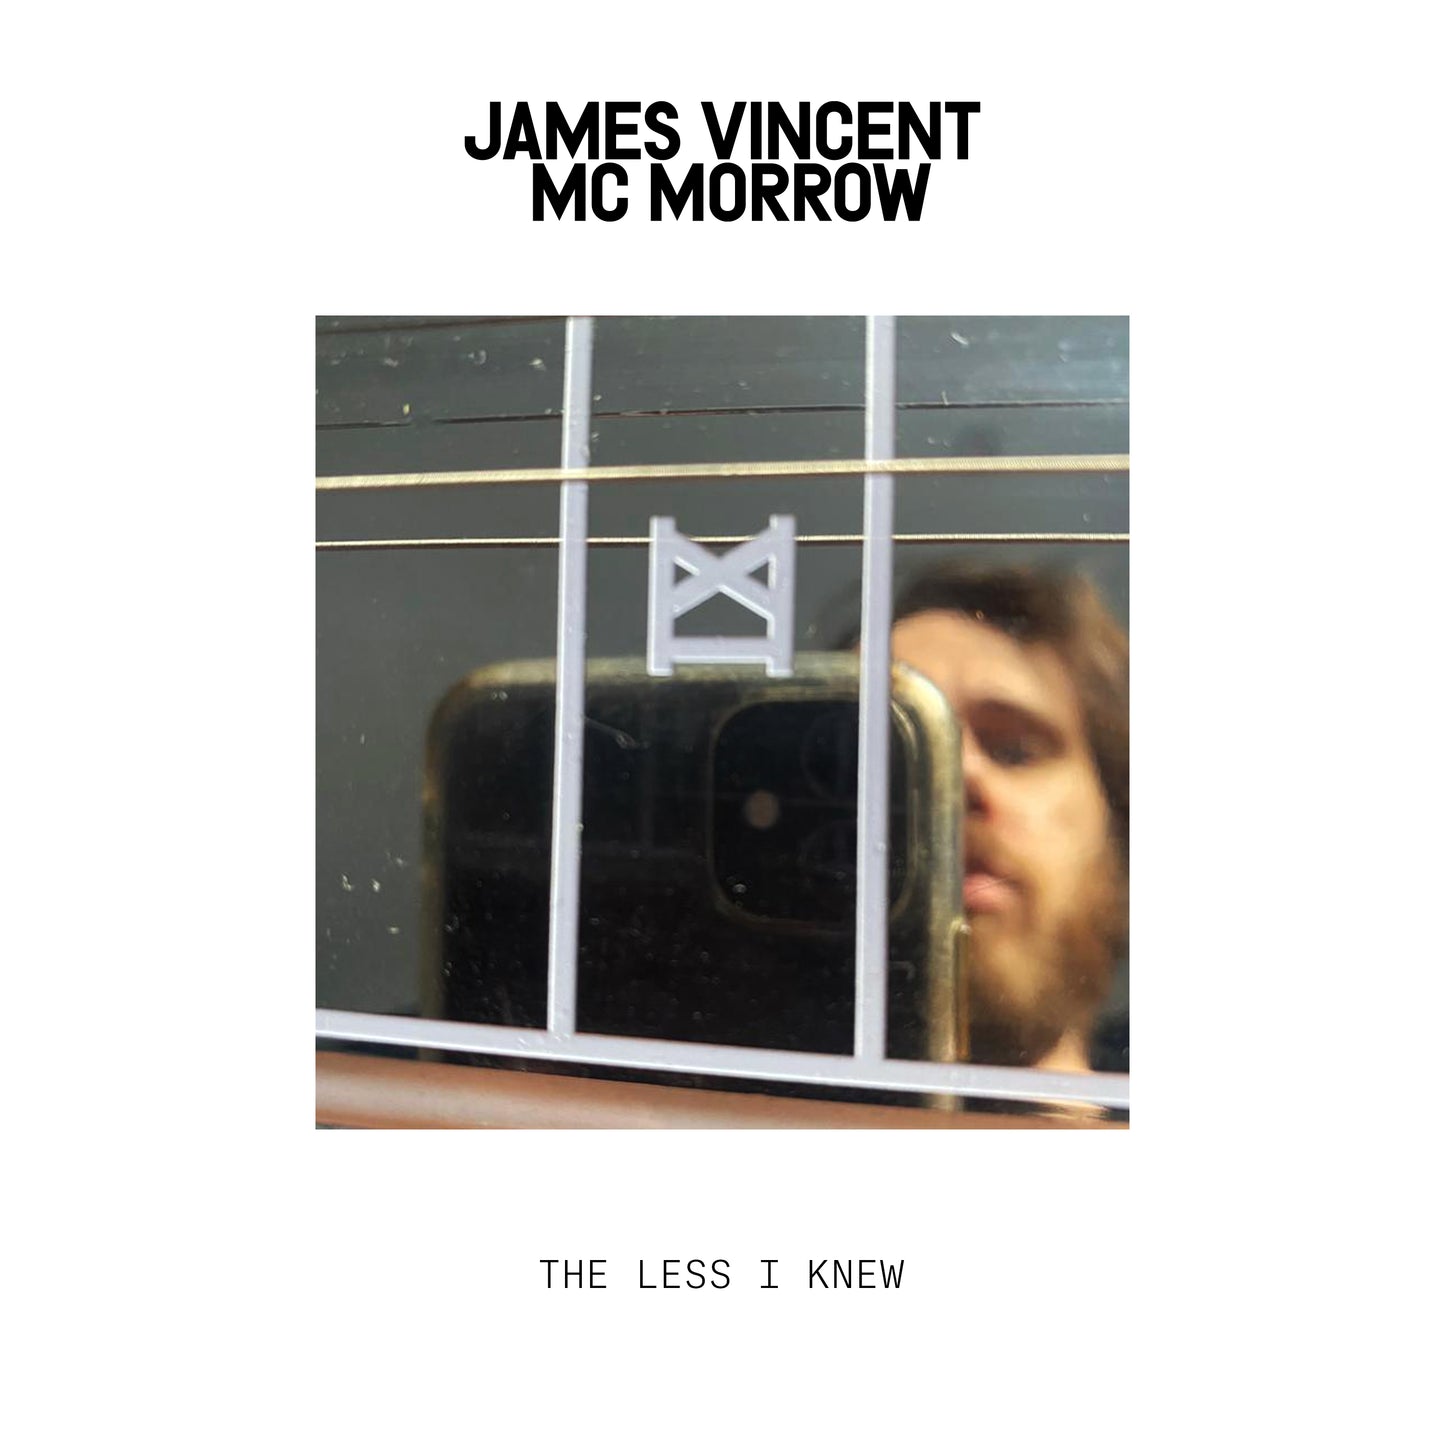 James Vincent McMorrow - The Less I Knew (LIMITED SIGNED COPIES)